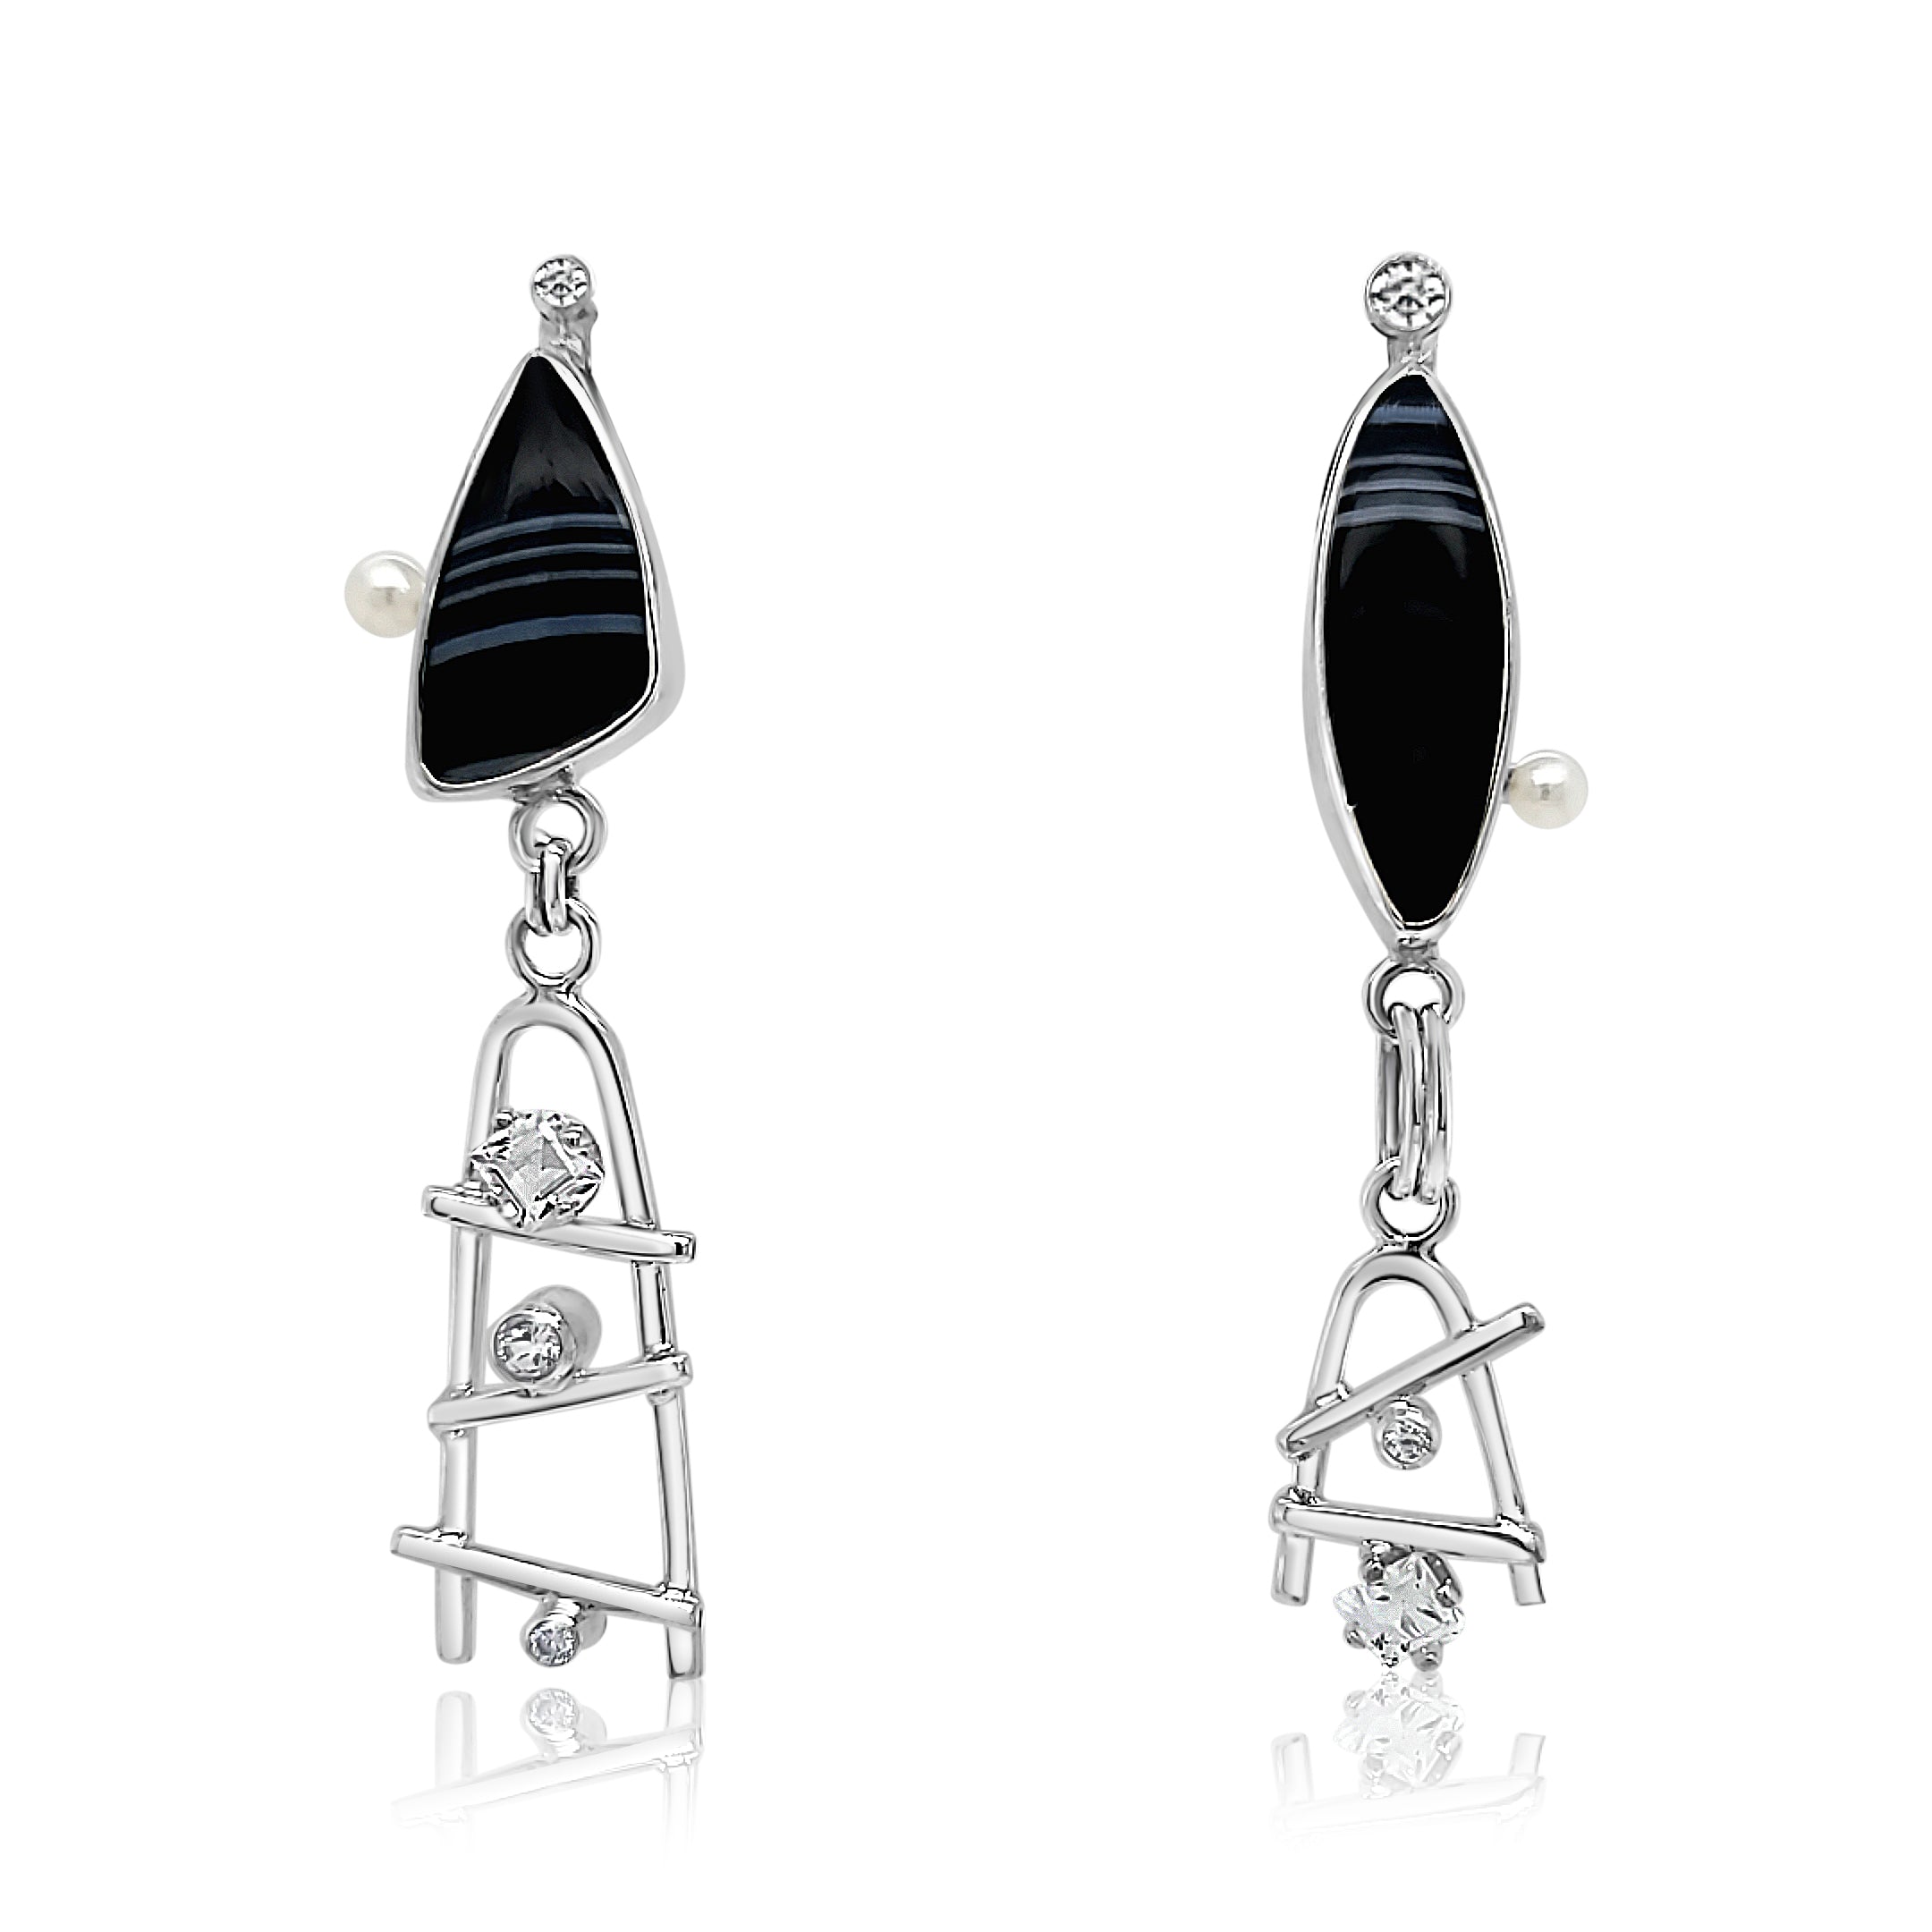 Asymmetric Tuxedo Agate earrings with White Topaz, Cubic Zirconia and Freshwater Pearls set in Sterling Silver.